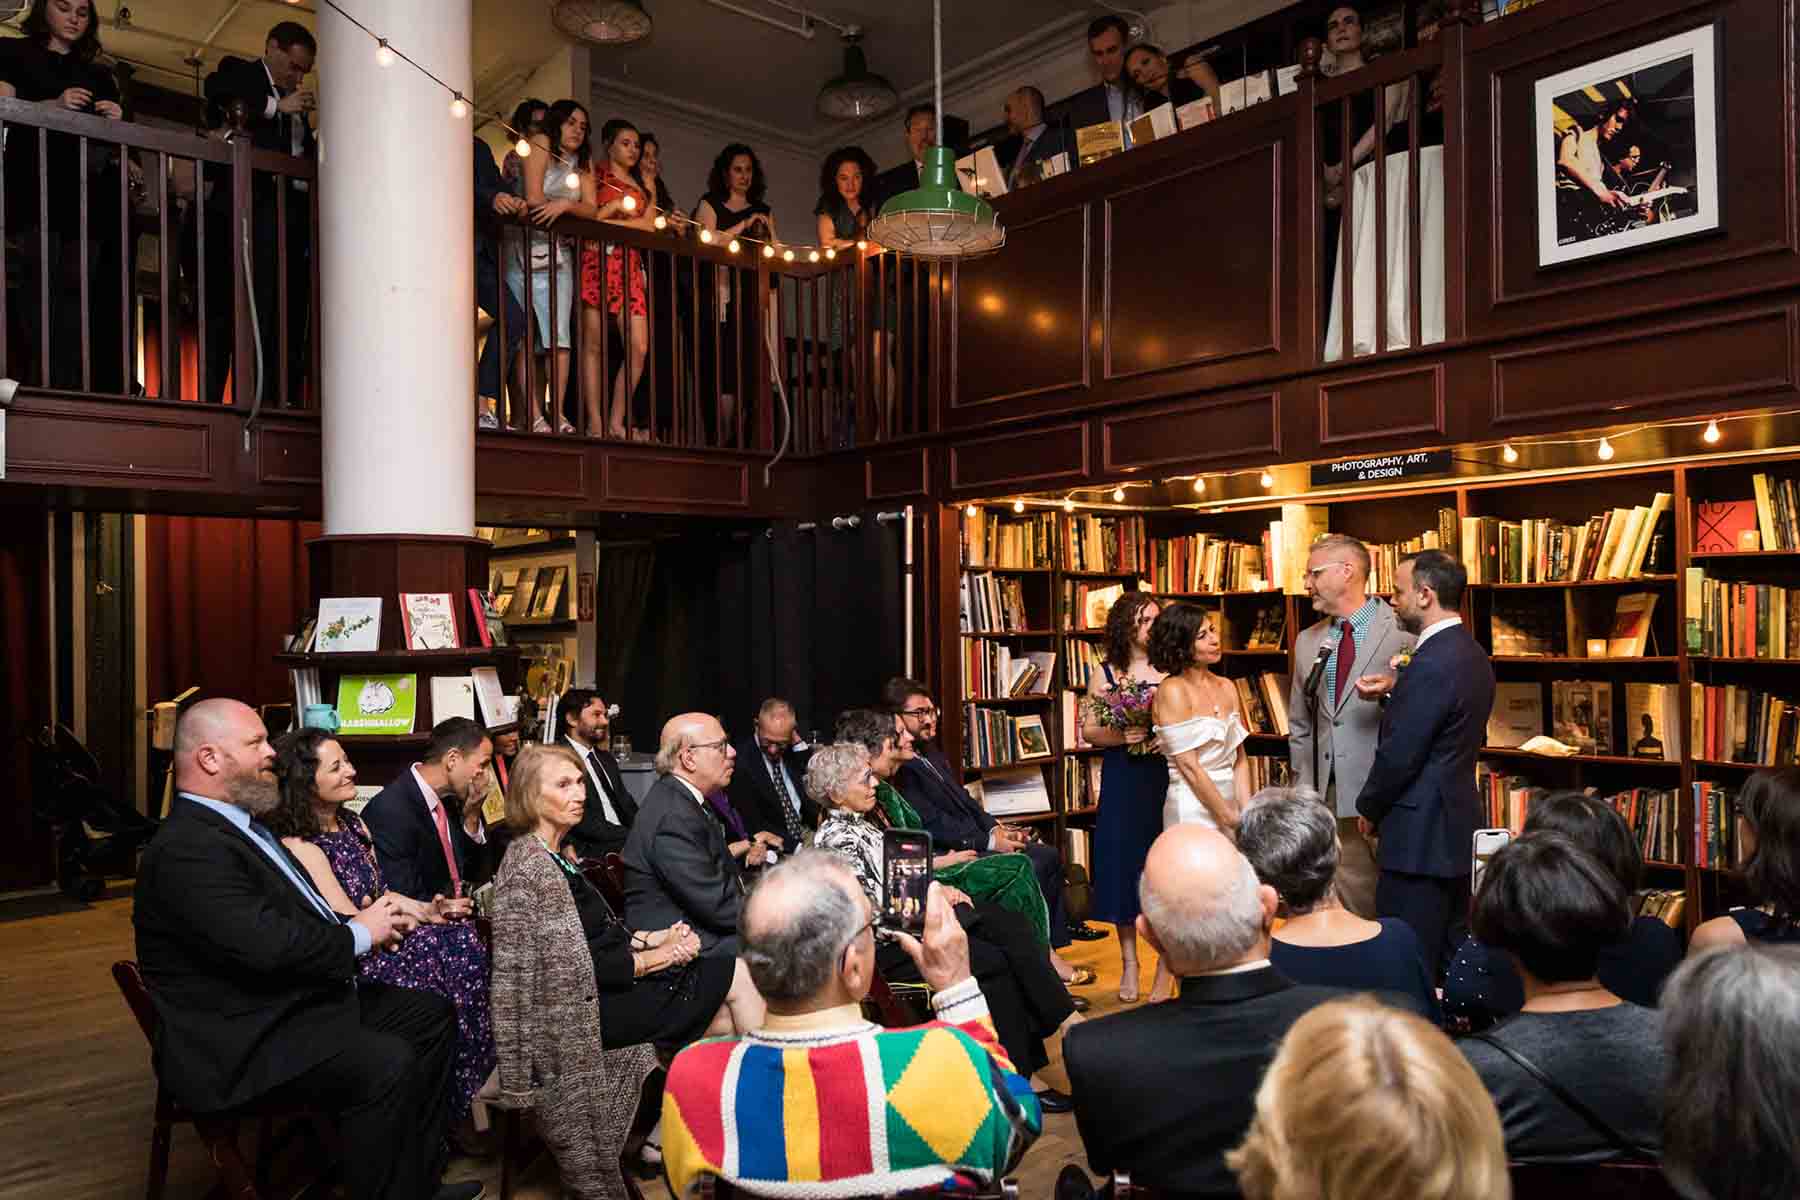 Wedding ceremony at a two-level bookstore for an article on the best wedding jobs for family and friends